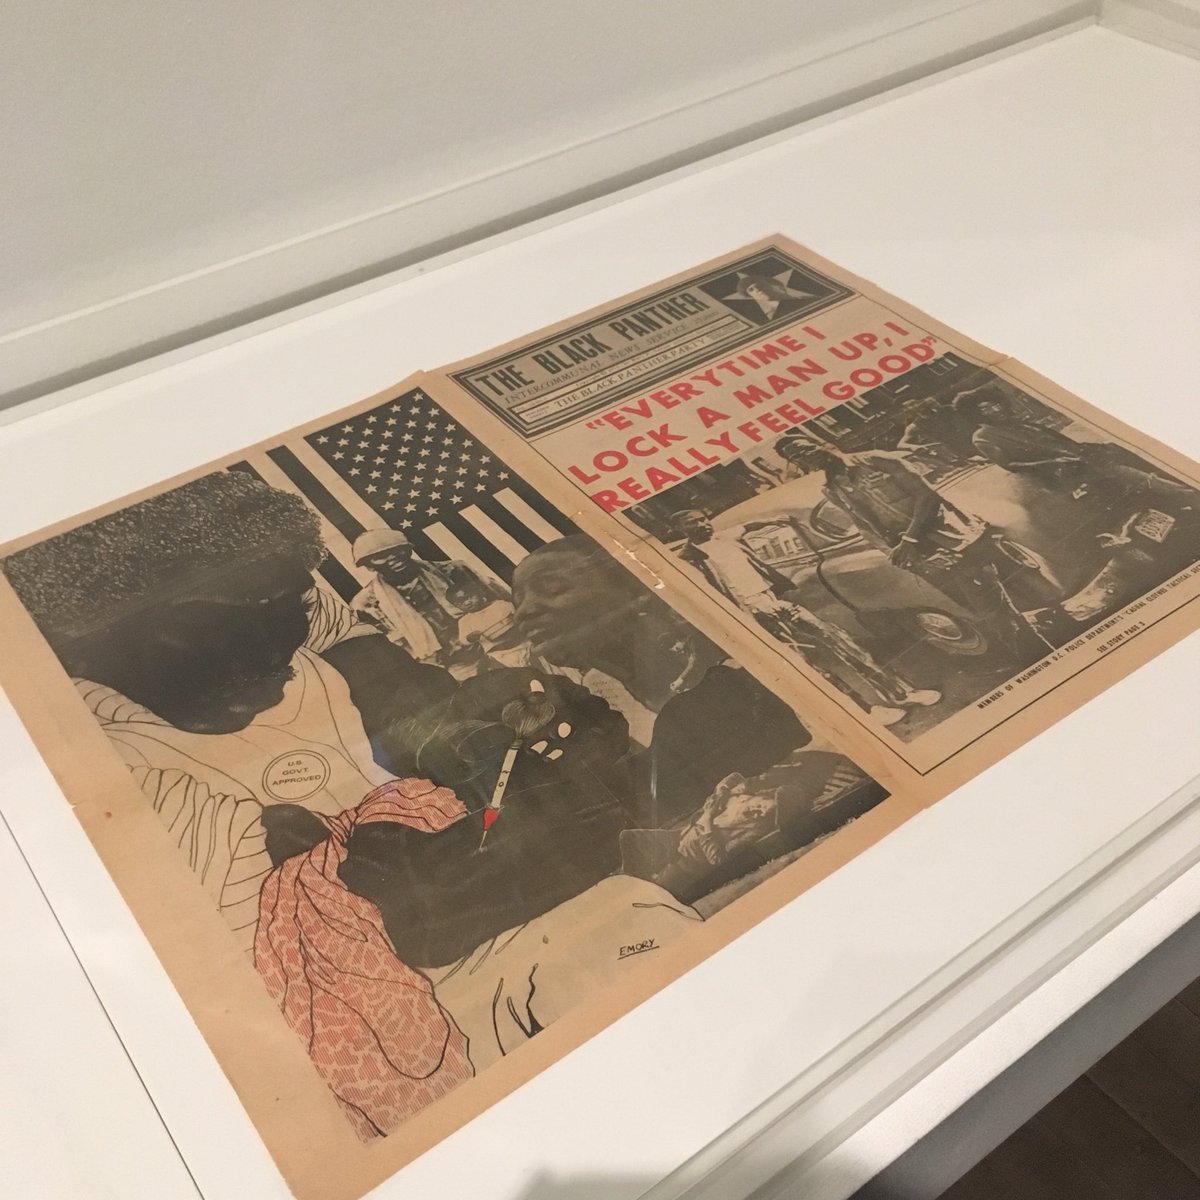 6. selections from the newspaper ‘The Black Panther’ and posters, c. 1970, Emory Douglas.